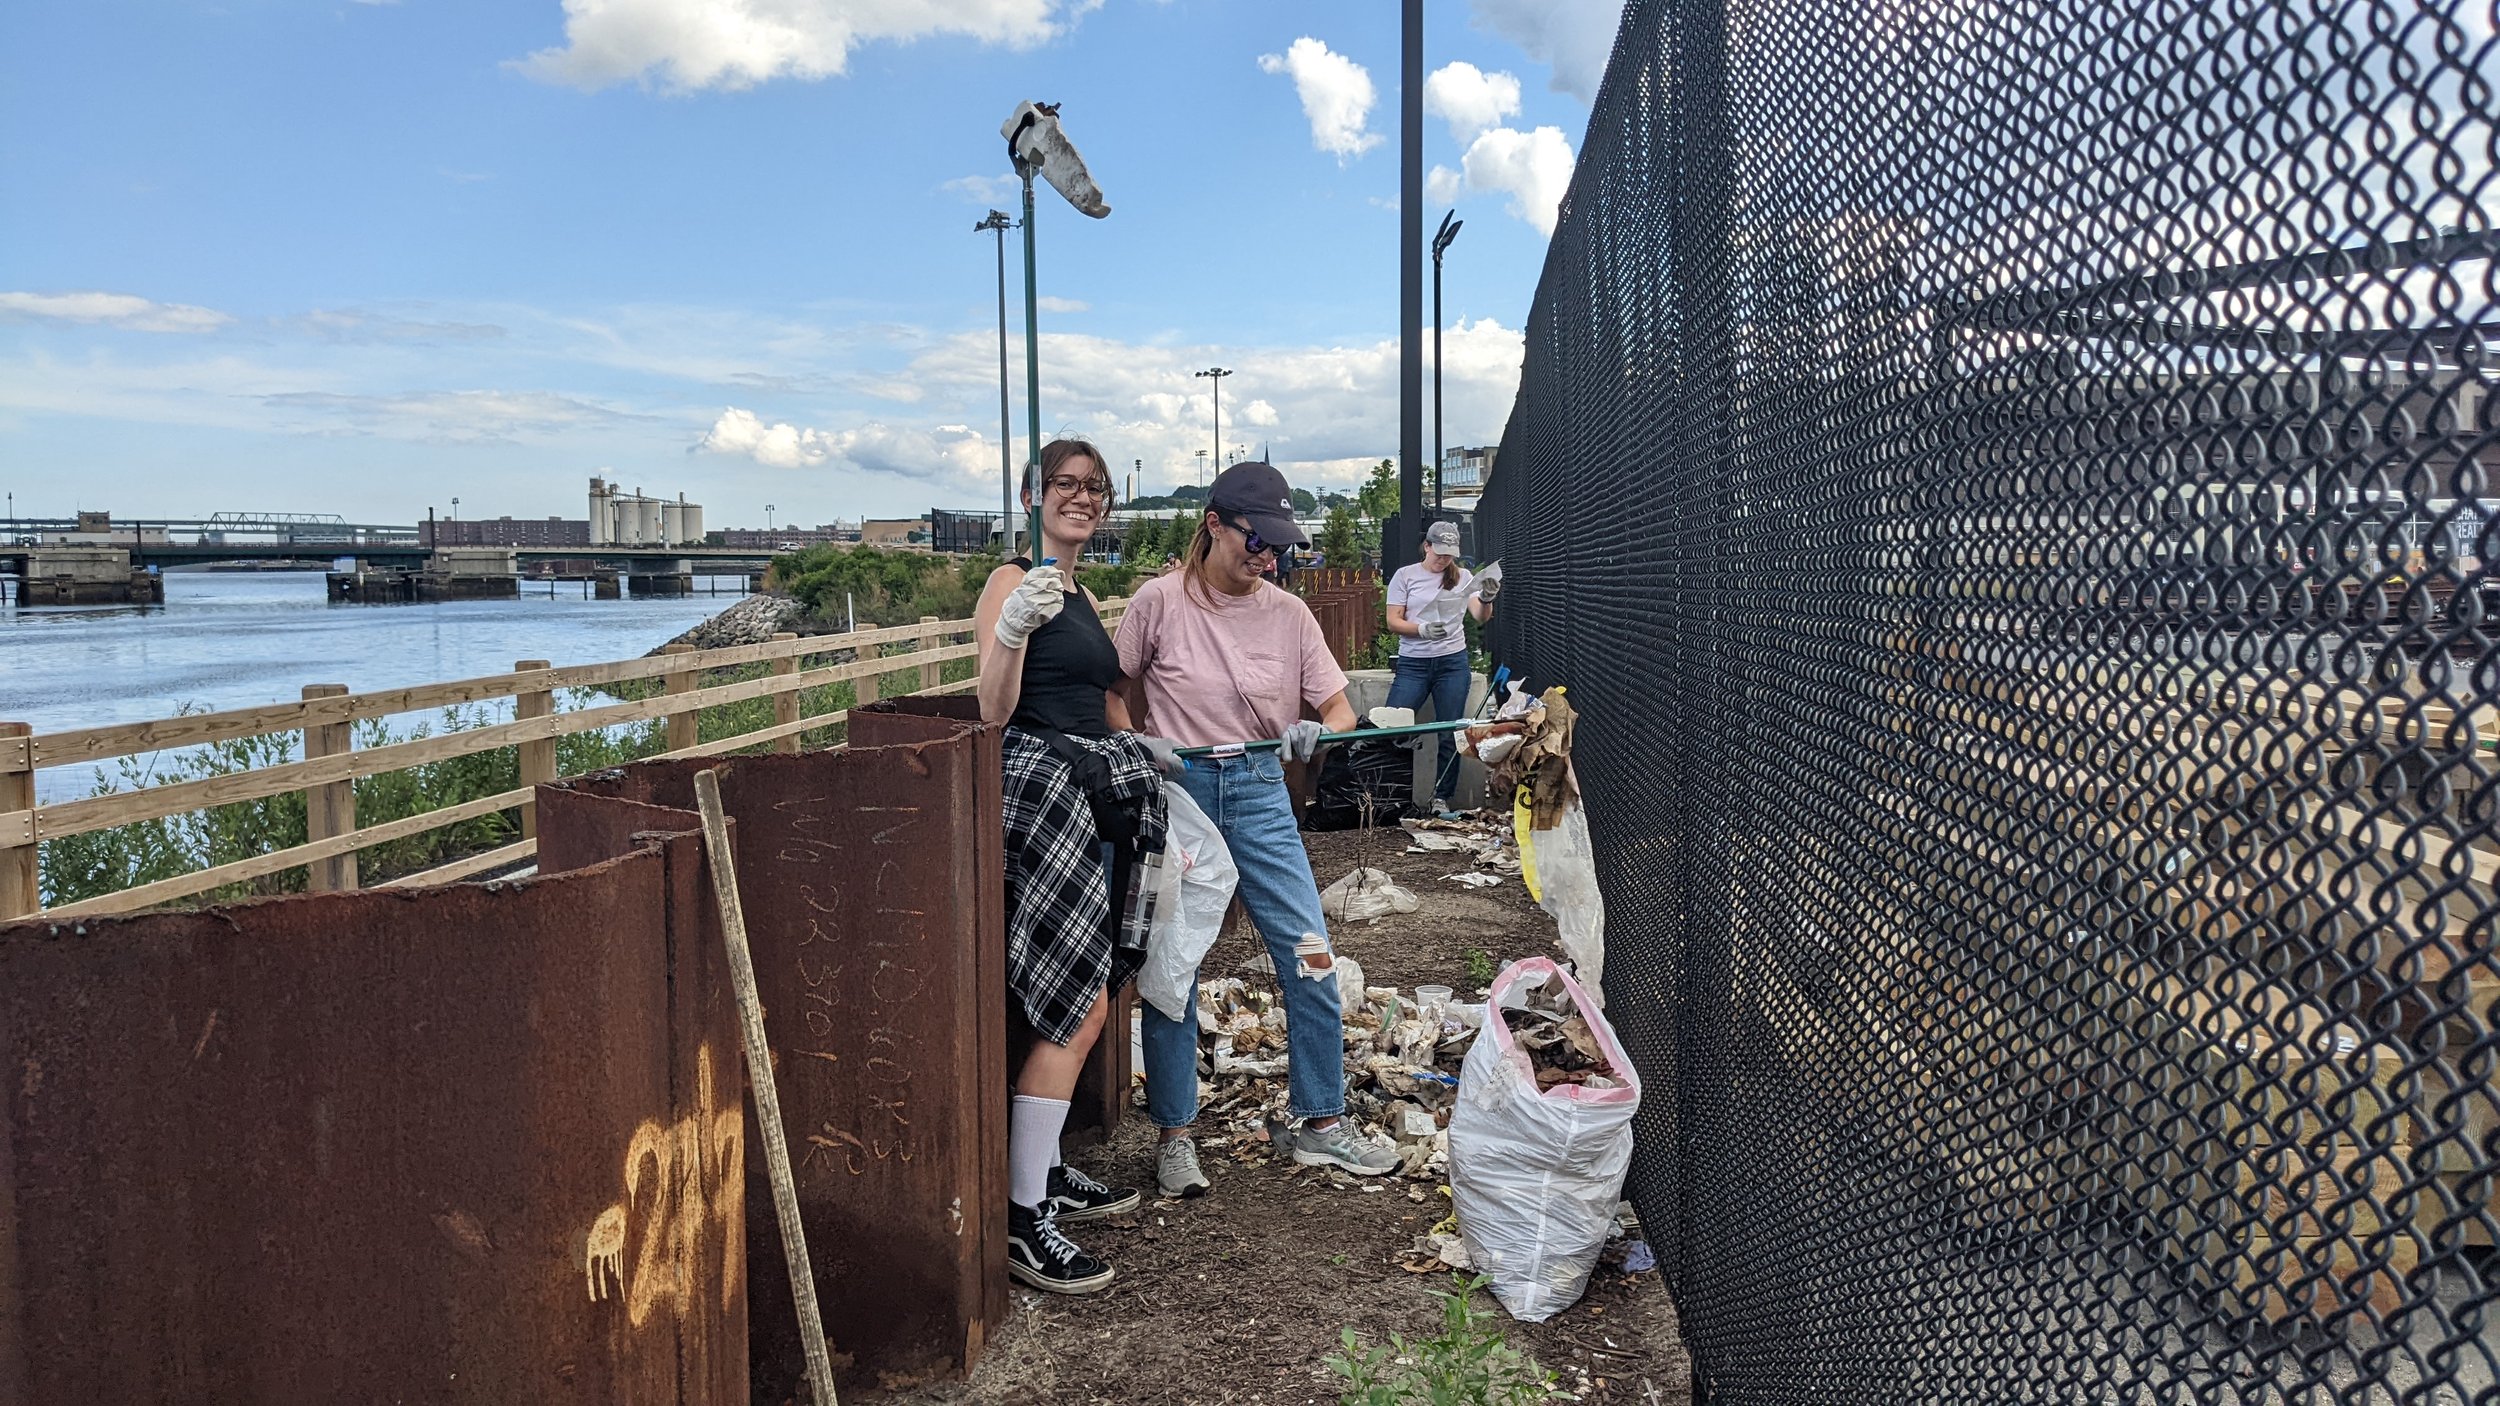  8.24.2022 | MIT Sloan students pick up trash along the Mystic River in Somerville. This year, 150+ college students participated in our stewardship efforts – we love seeing university communities take action for their local environment! Credit: Sush